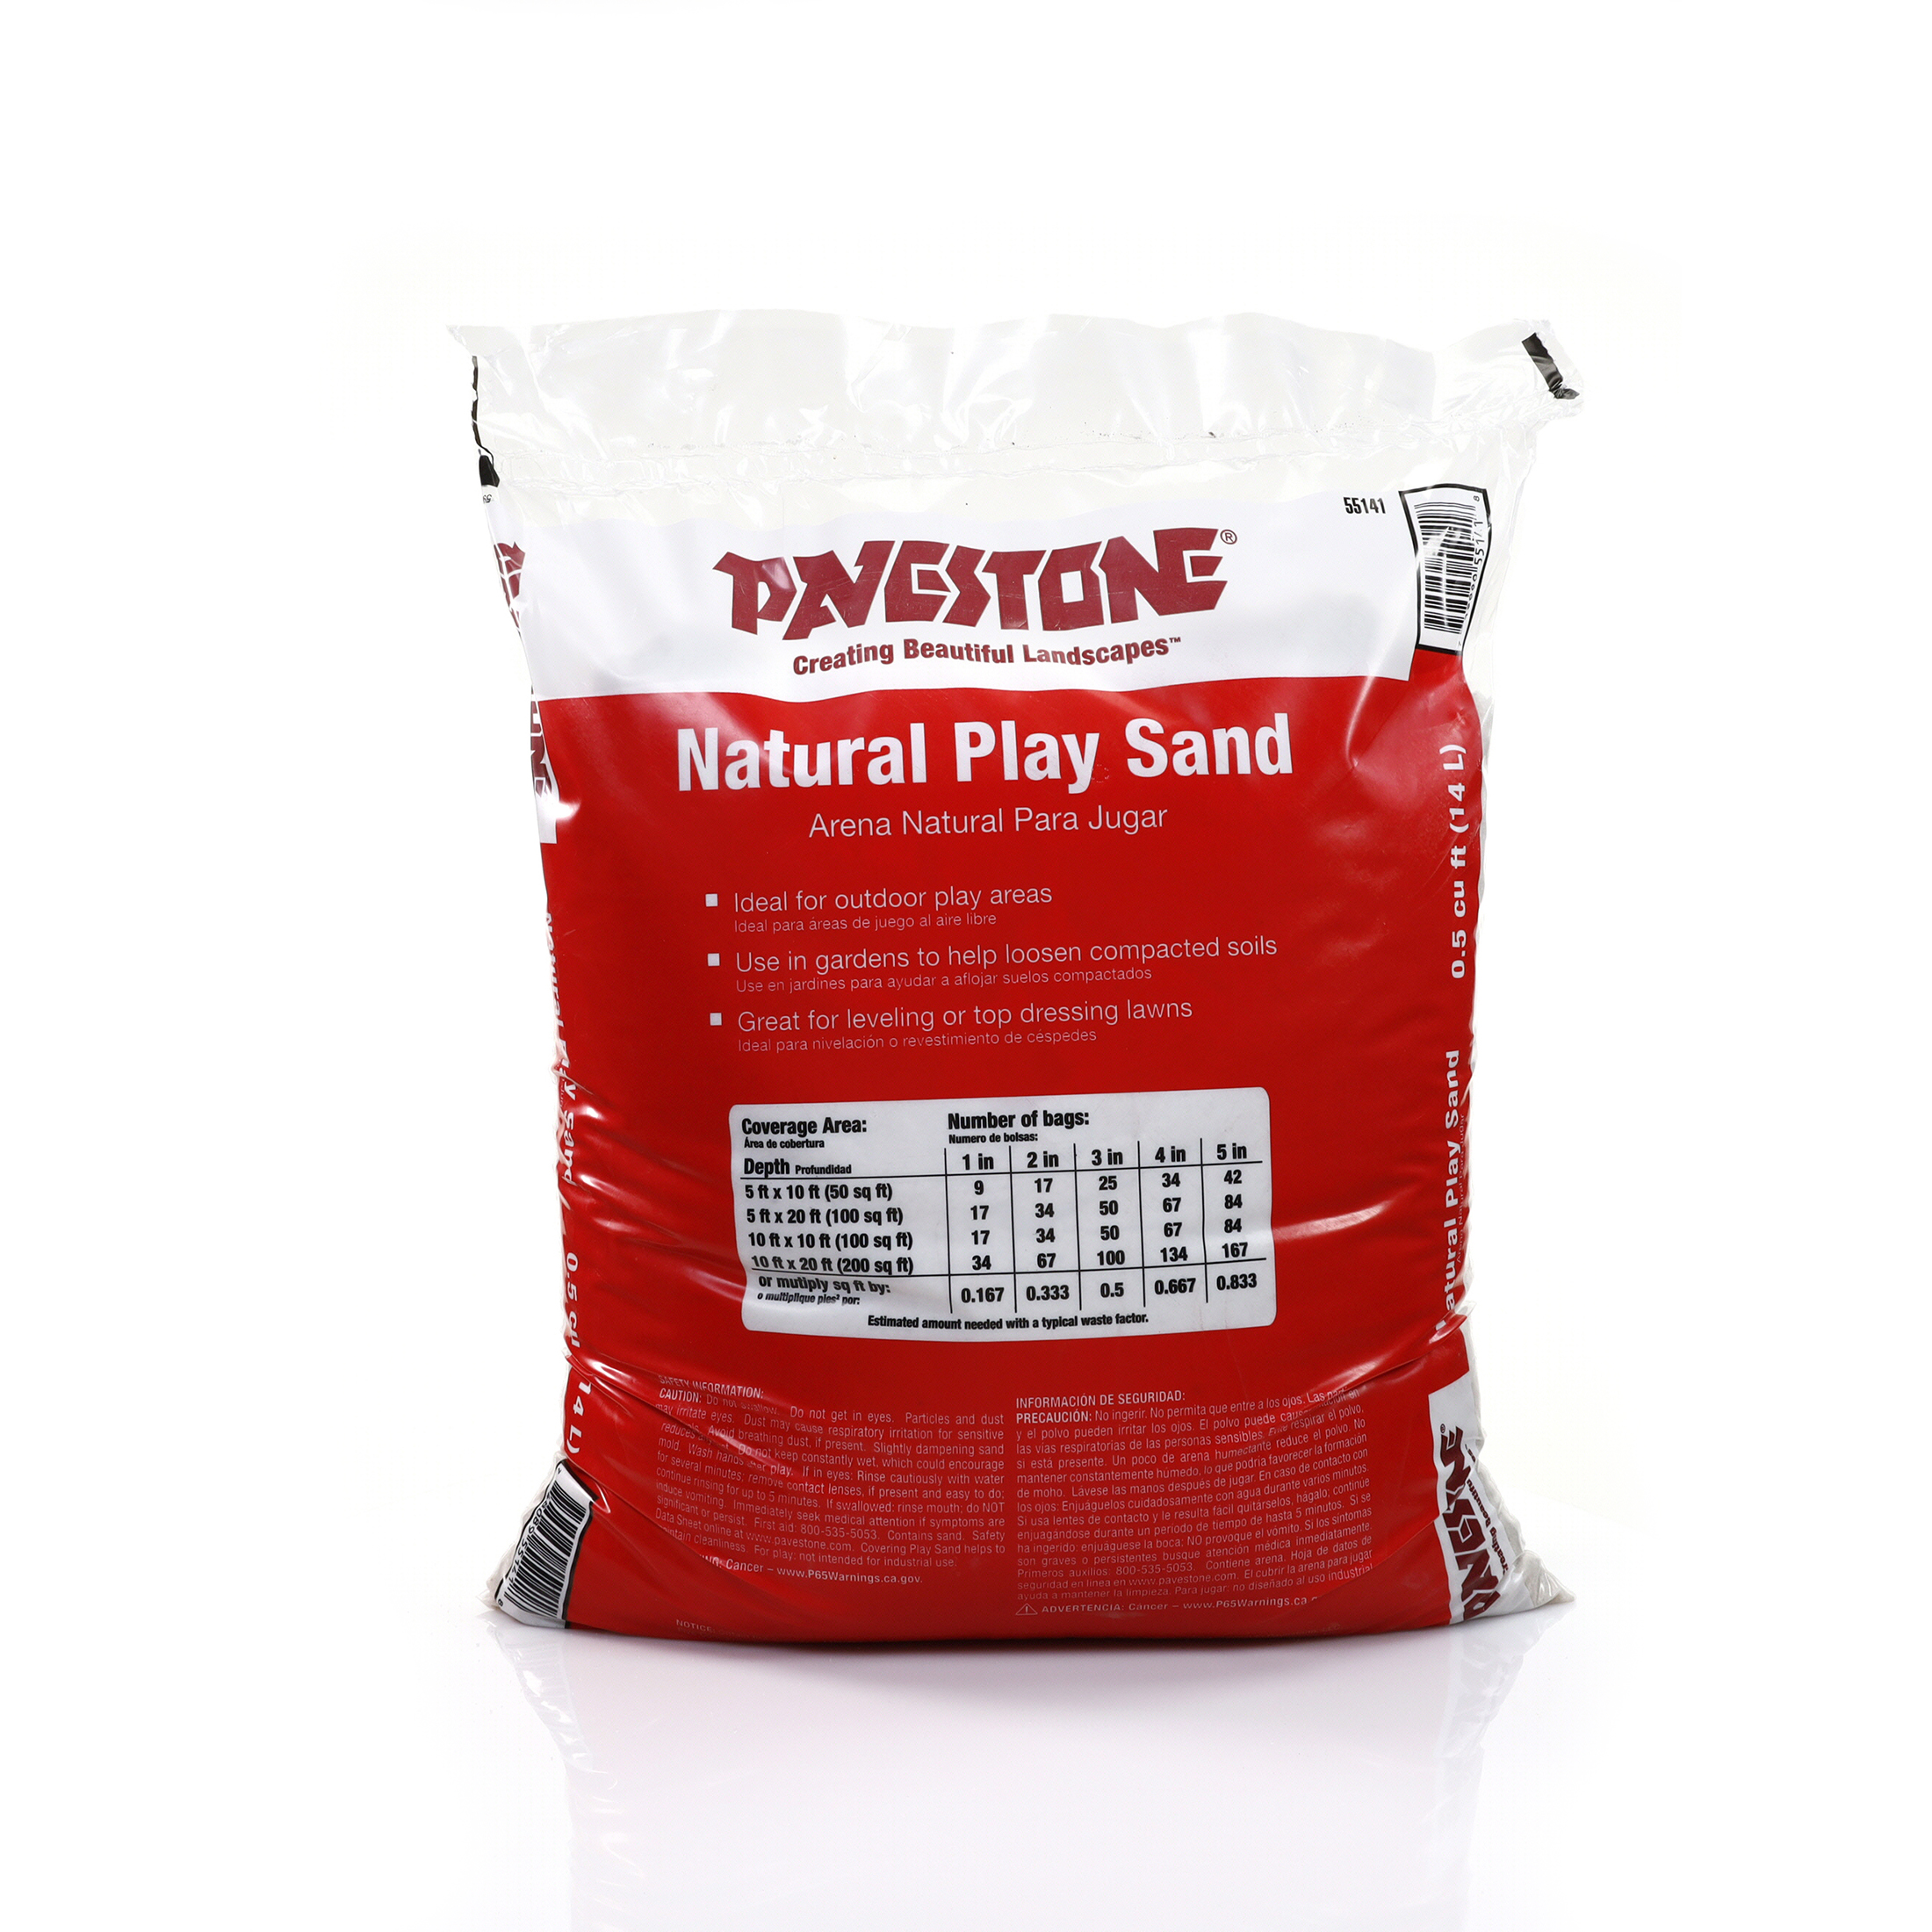 Pavestone .5 Cu. ft. Bagged Natural Brown Play Sand - image 1 of 6